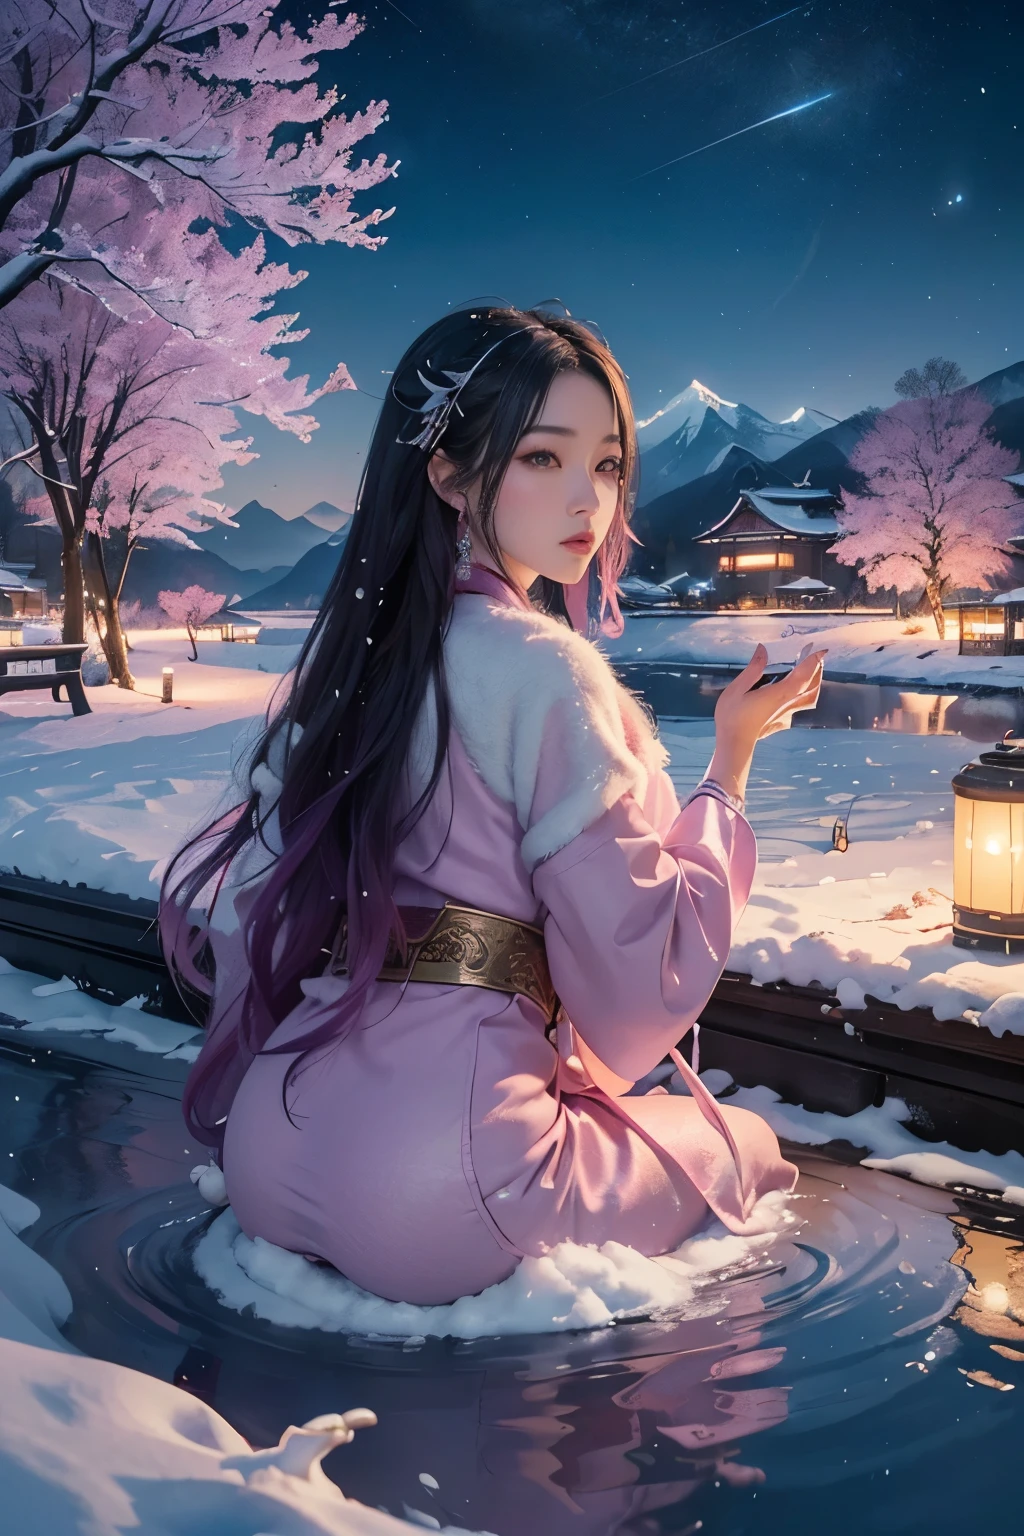 (((Xin Haicheng style)), pixiv, anime drawing, high quality,
Pink and purple hued sky blanketing the horizon,
Beautiful scenery unfolds with a magical realism touch,
((Xin Haicheng style)): 0.8,

Artistic atmosphere pervades as the stars twinkle bright,
Starry night scene, a train passes by in soft light,
Hills dotted with the glow of lanterns, snow-capped mountains in sight,
Soda water ripples, reflecting the tranquil, serene night,

Grass sways gently, trees sway in rhythm, smokes wafting up high,